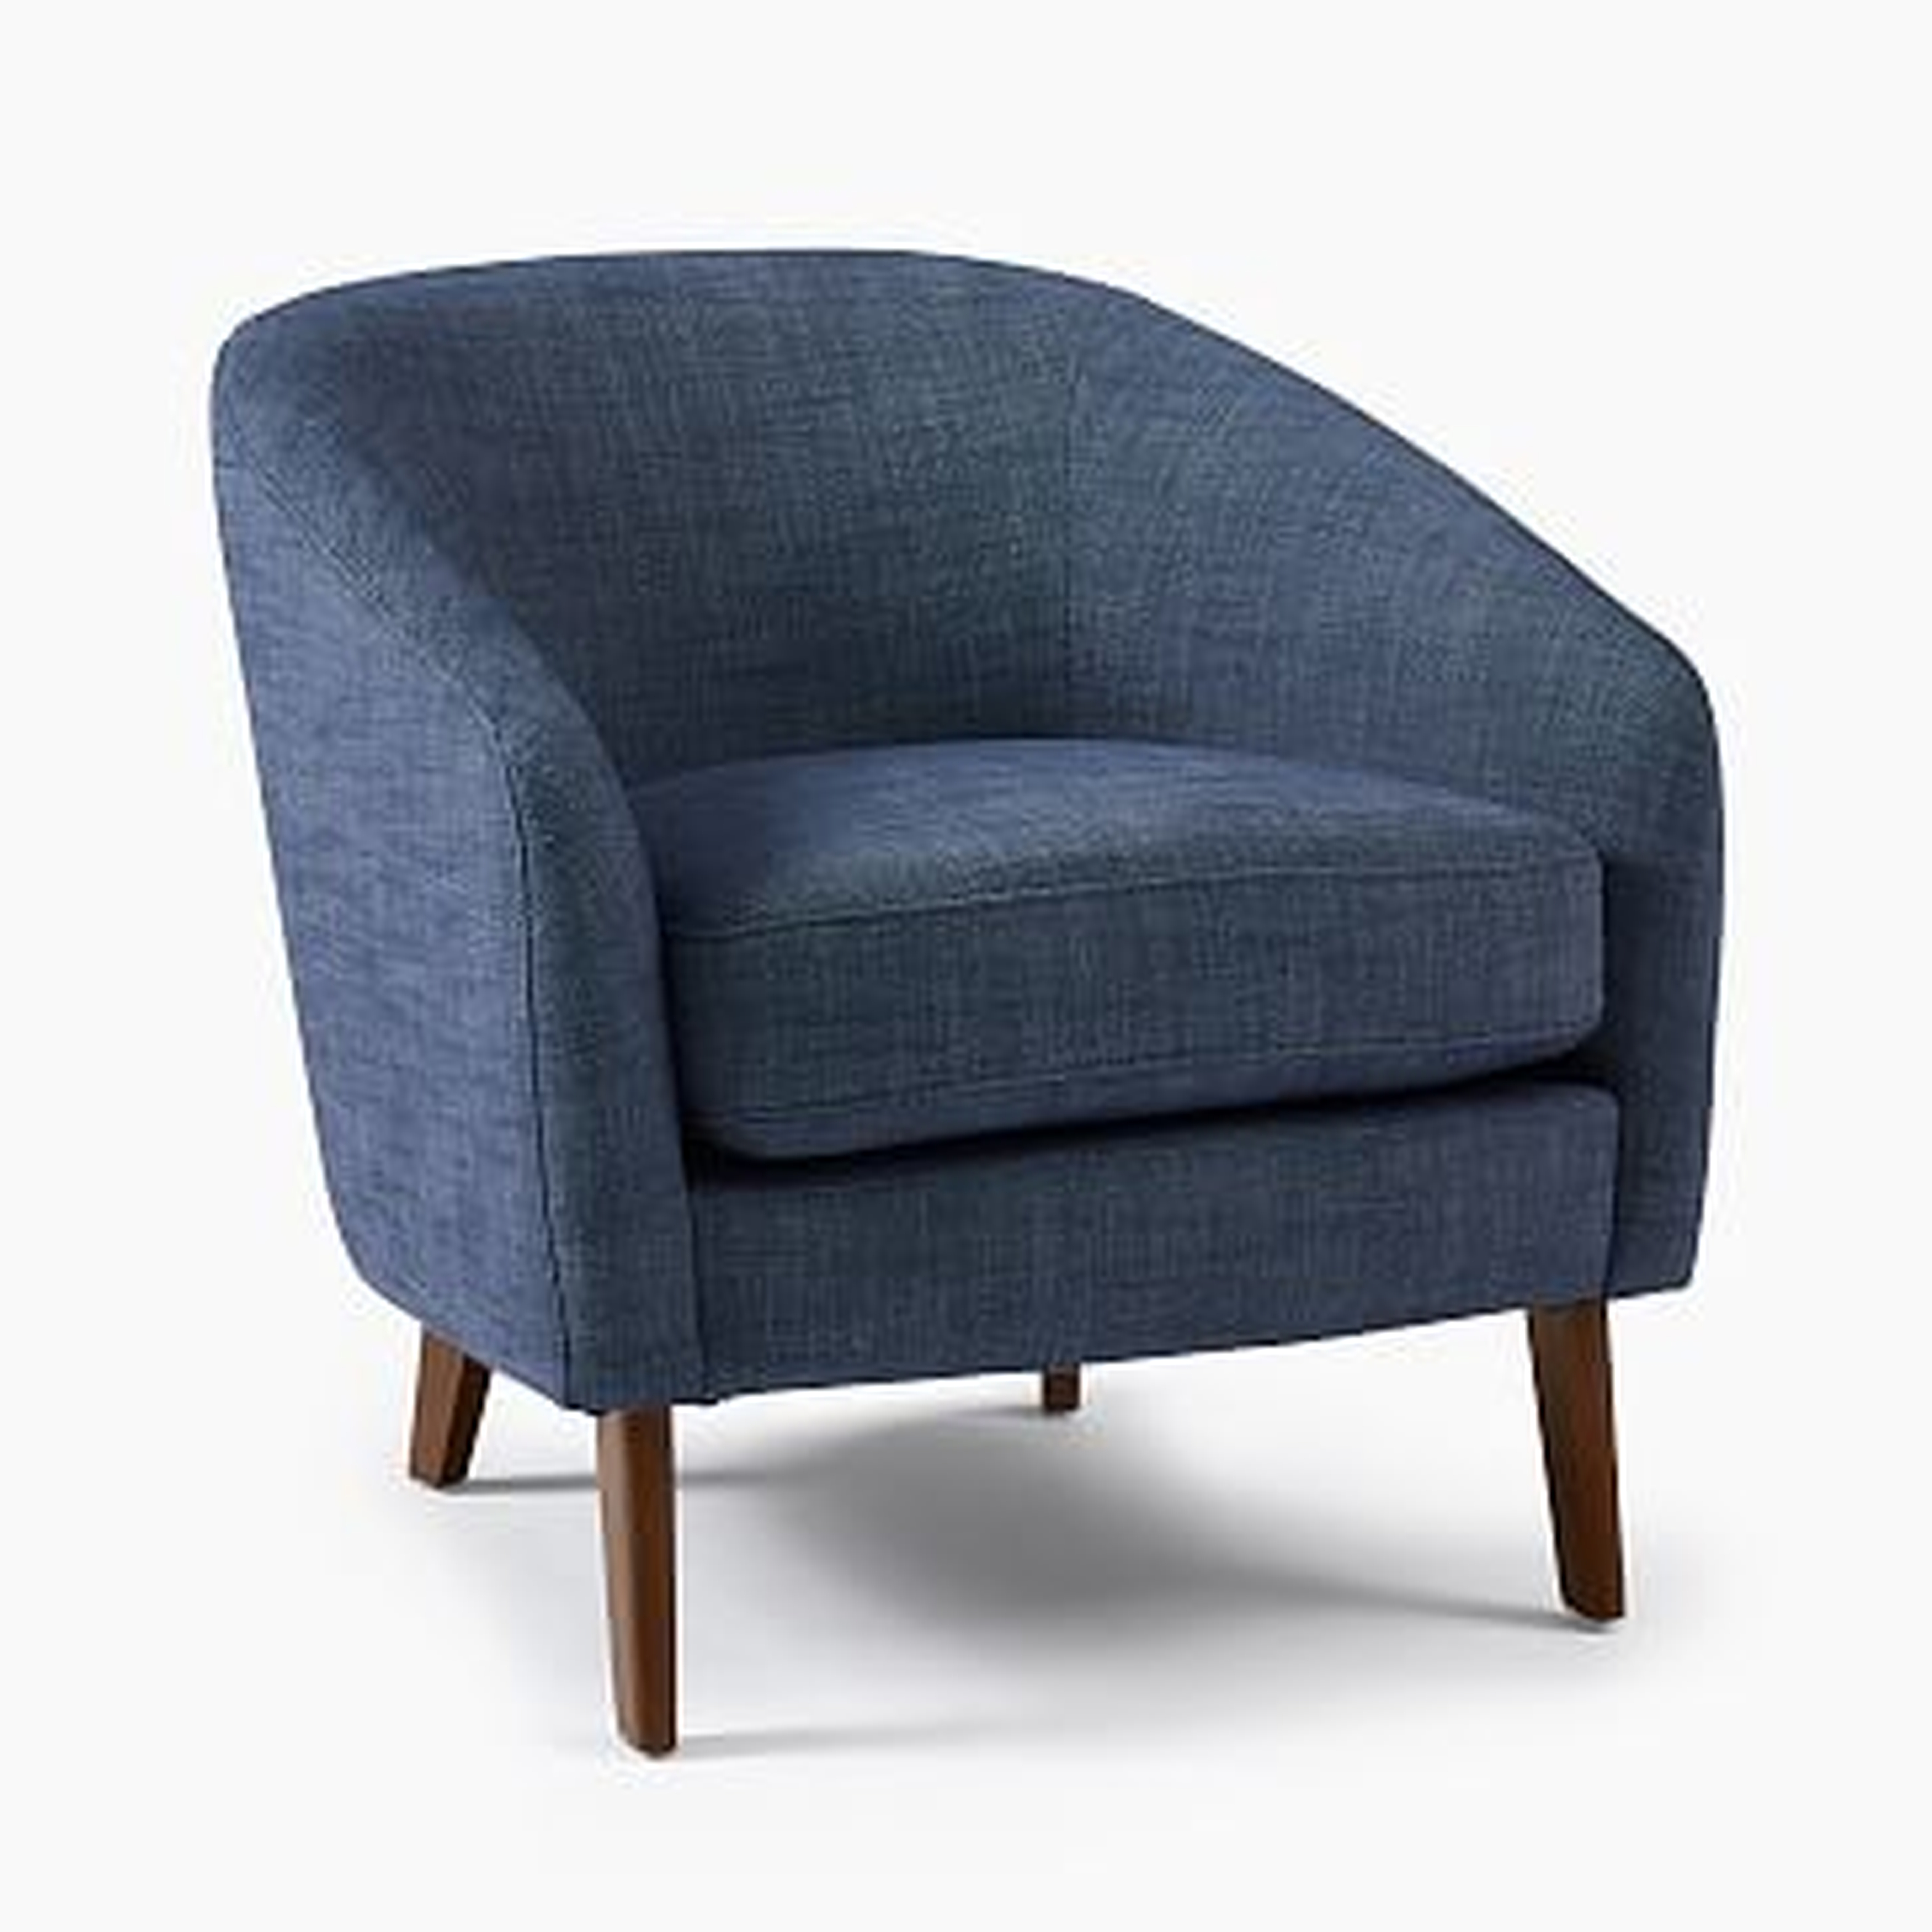 Jonah Chair, Performance Yarn Dyed Linen Weave, French Blue, Pecan, Set of 2 - West Elm